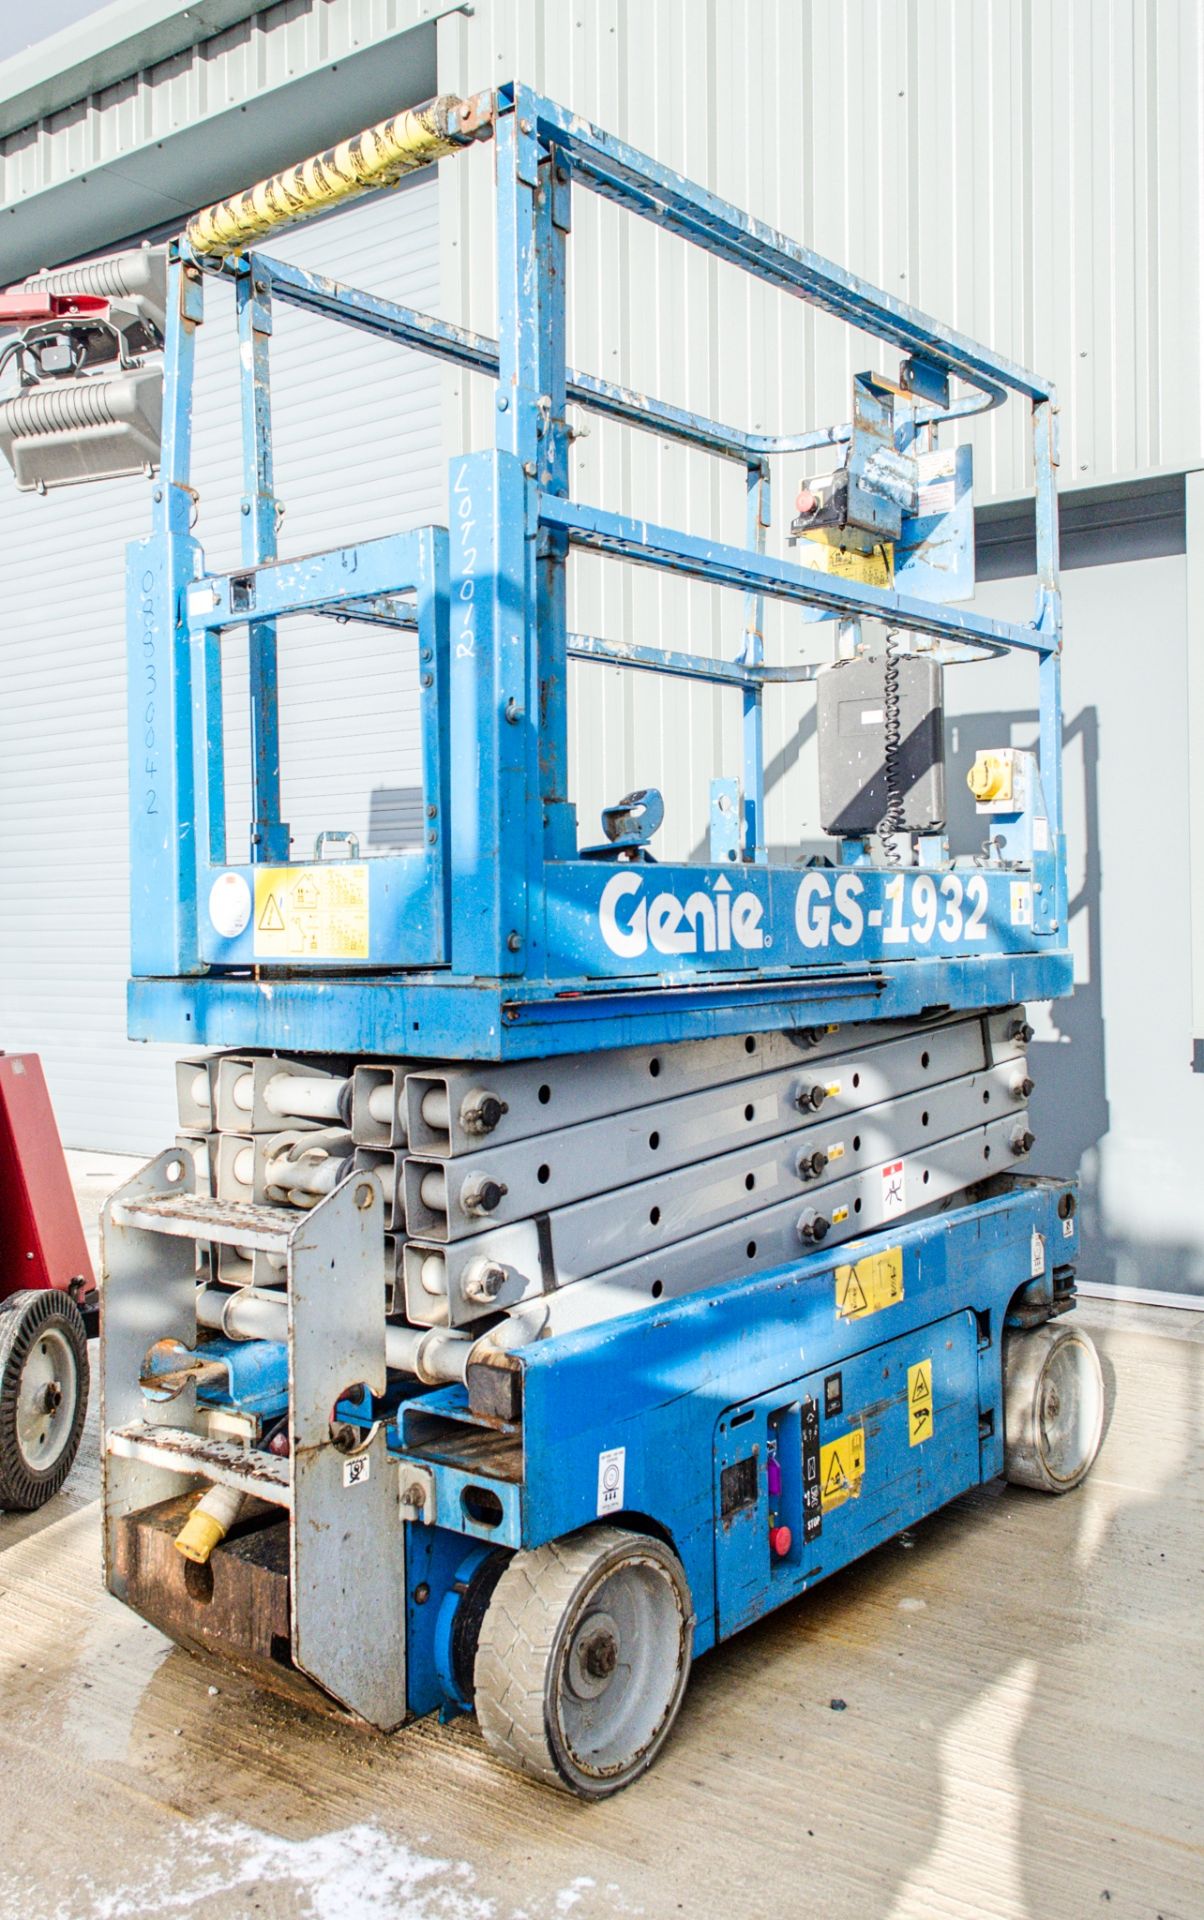 Genie GS1932 battery electric scissor lift Year: 2007 Recorded Hours: 309 08830042